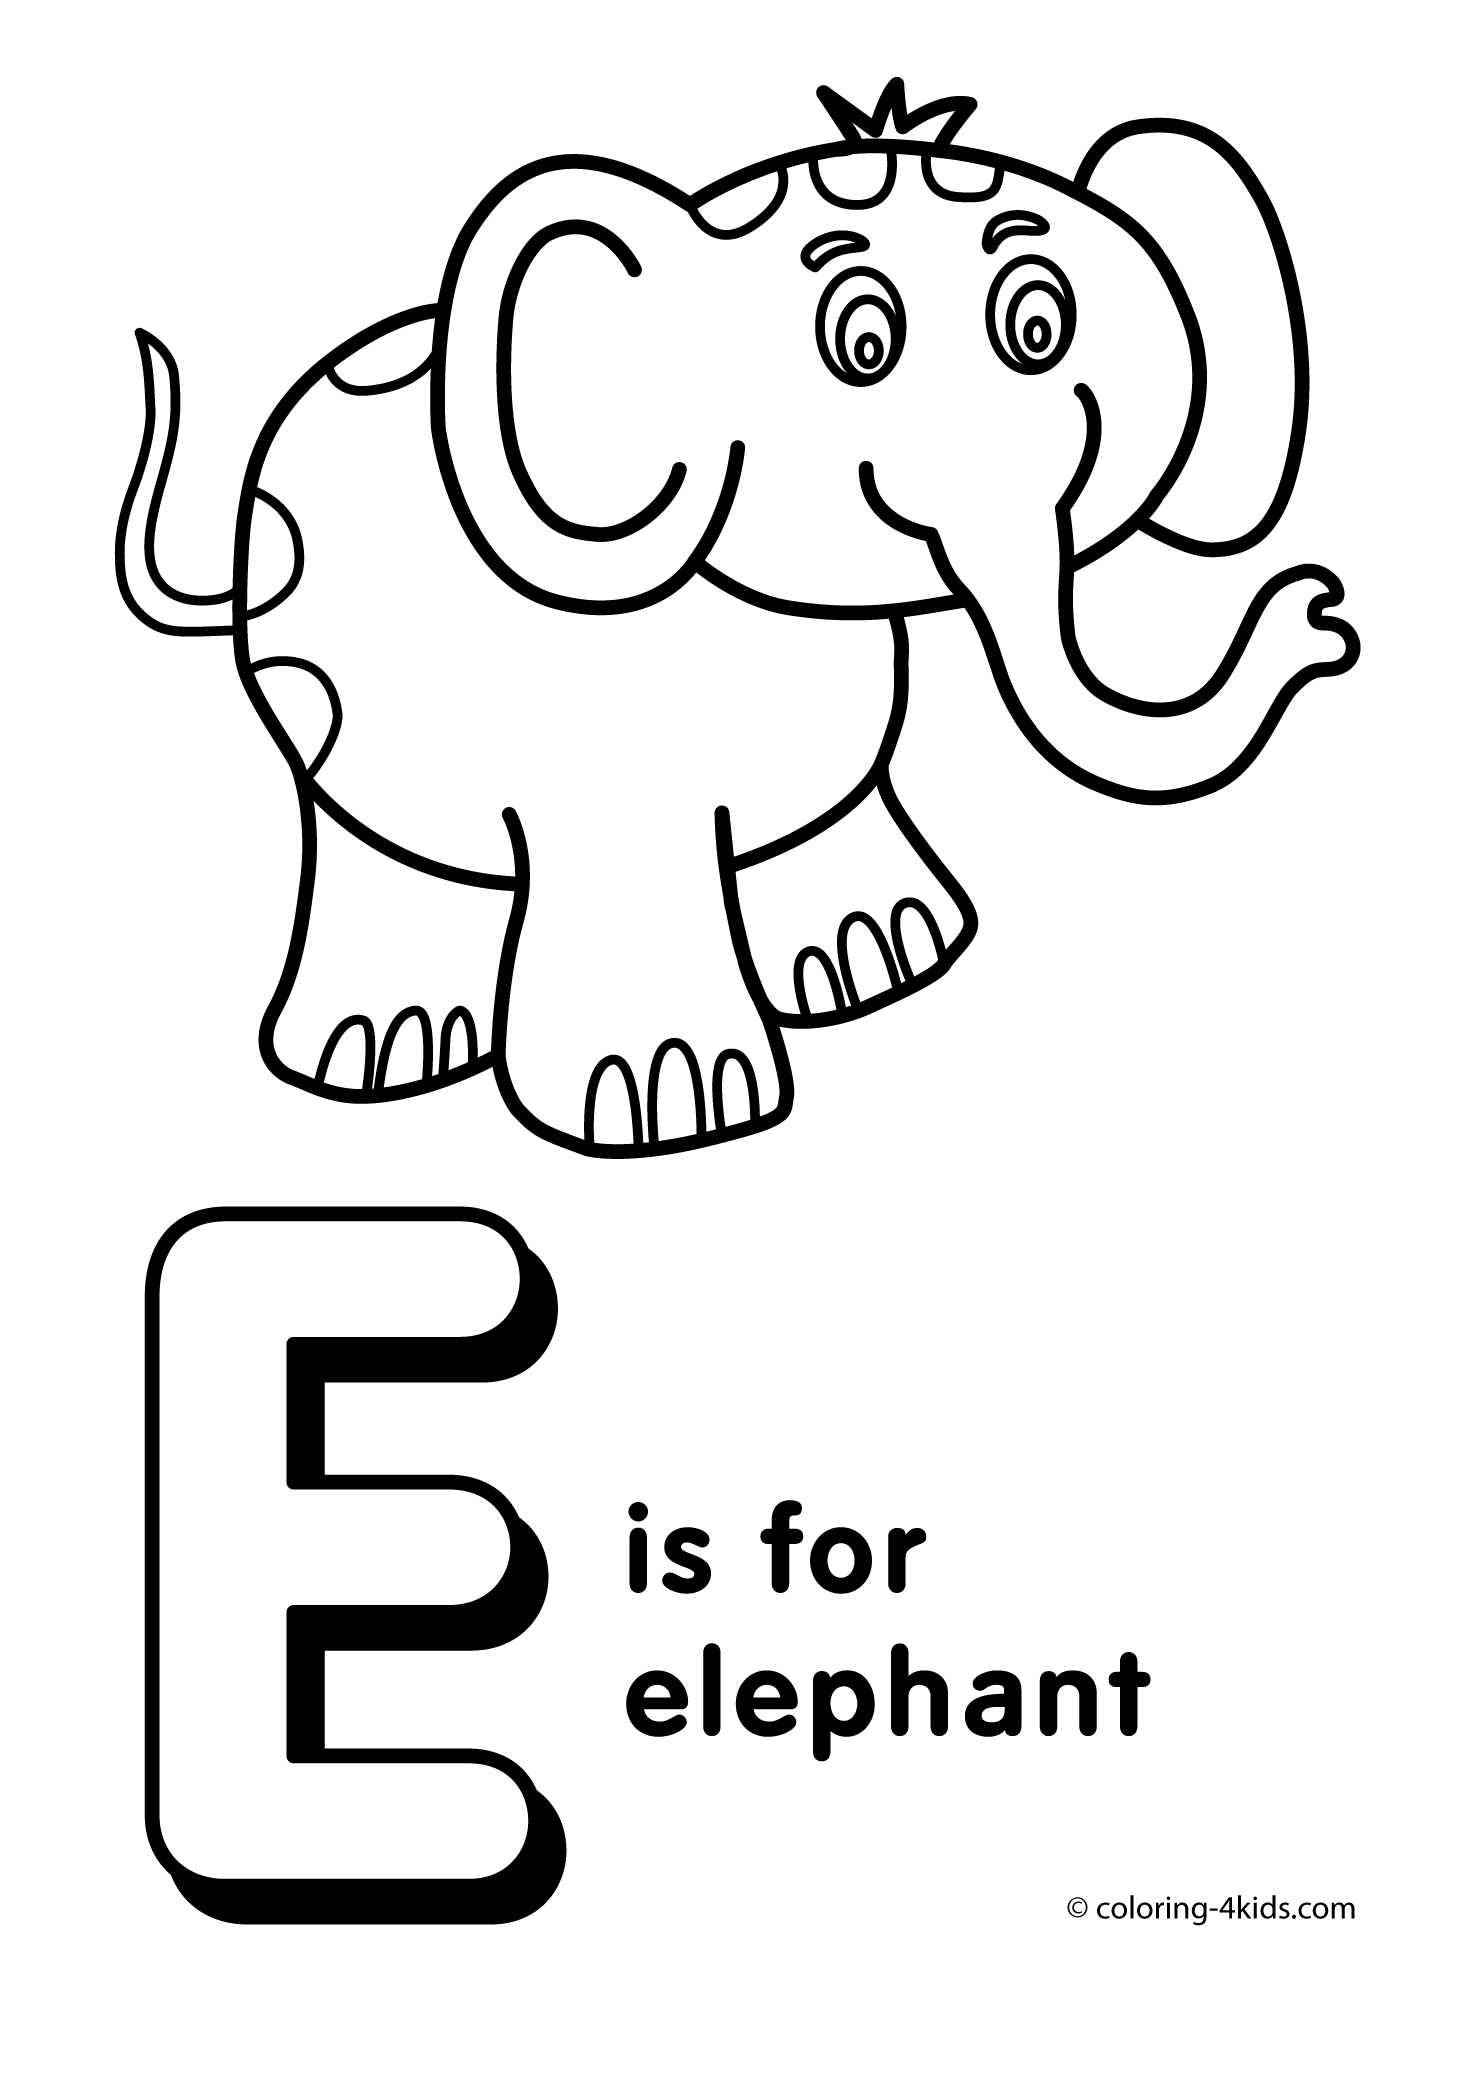 Letter e coloring page